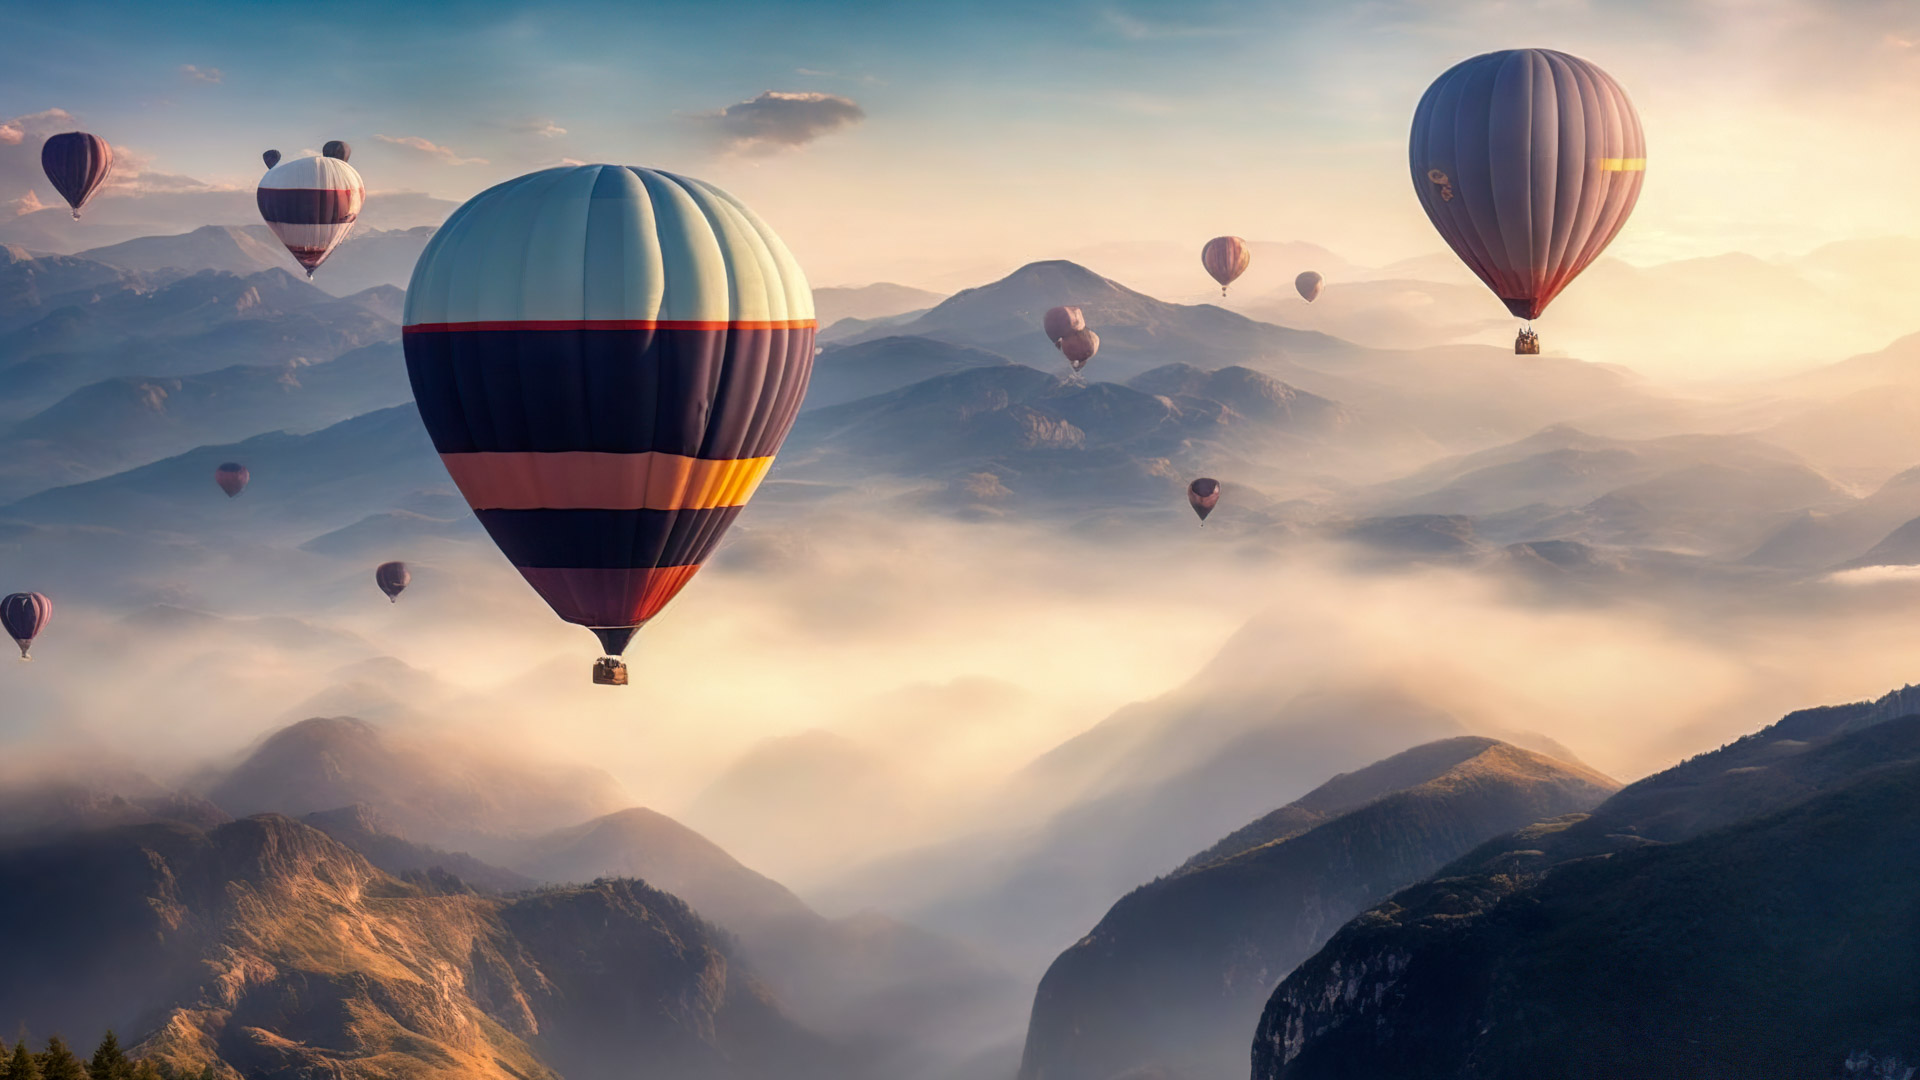 Experience the surreal with our landscape mountain wallpaper, featuring a sky filled with hot air balloons drifting peacefully over a misty, mountainous landscape.